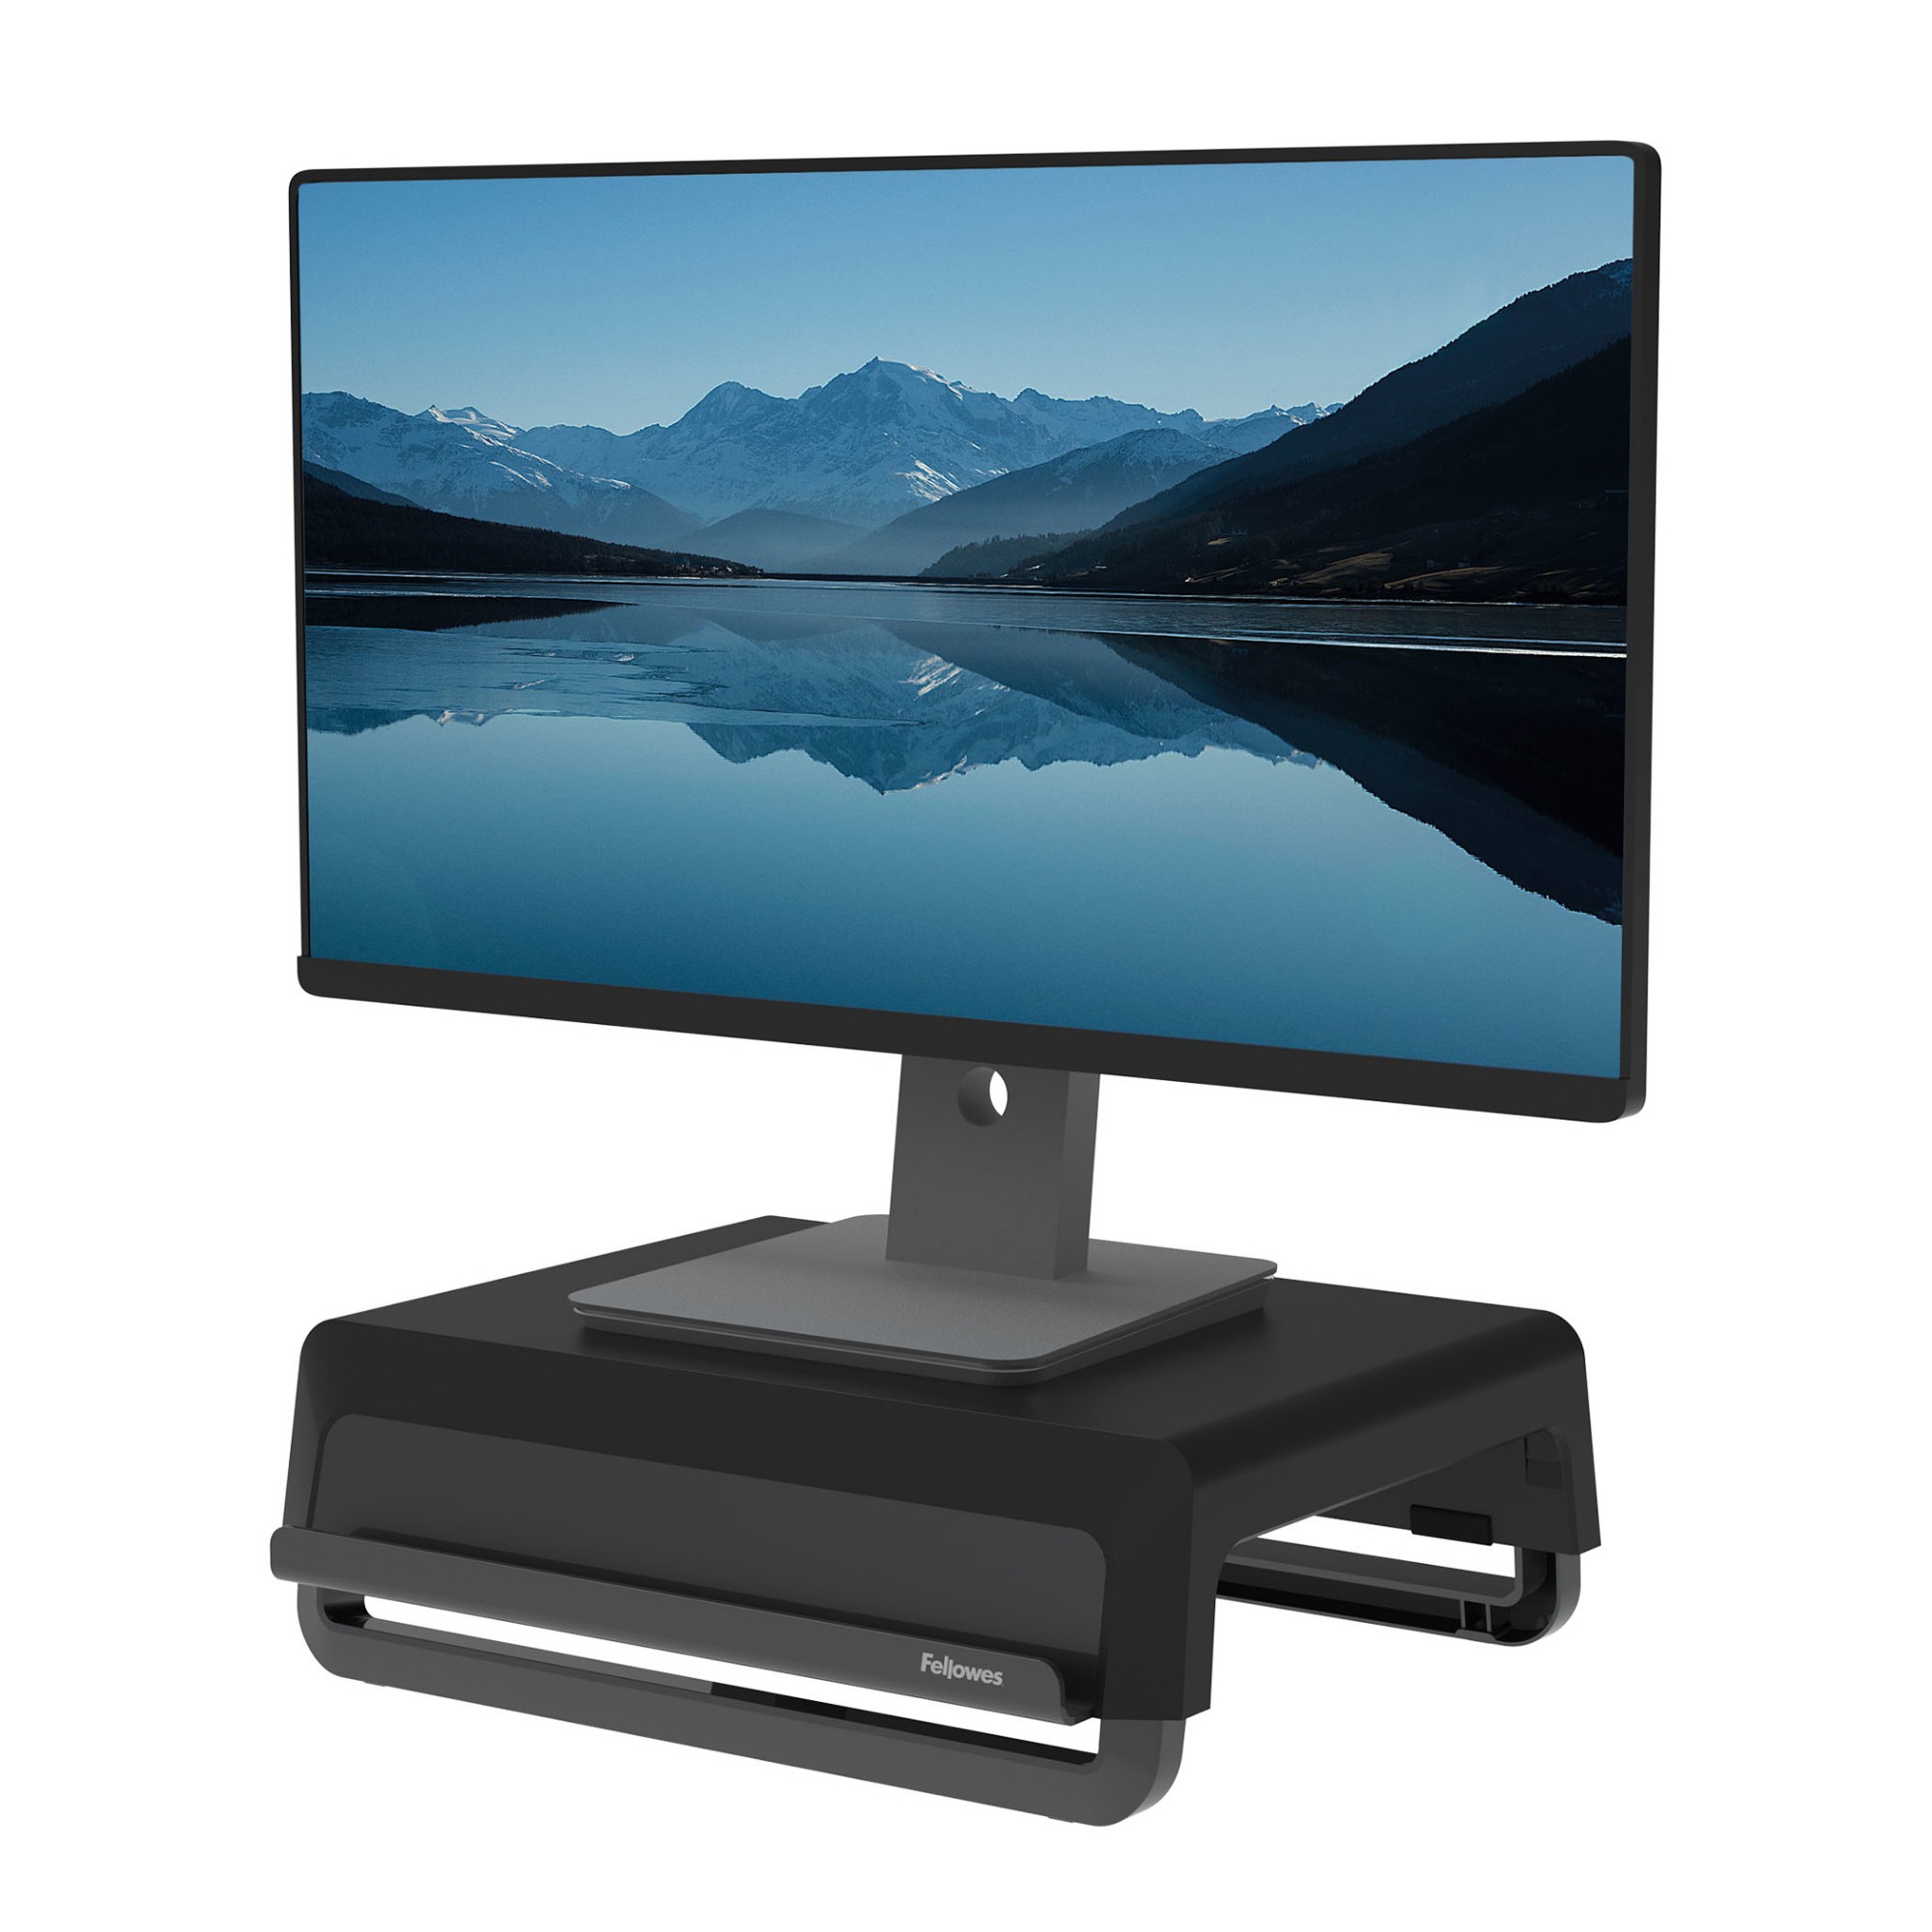 Photos - Mount/Stand Fellowes Computer Monitor Stand with 3 Height Adjustments - Breyta Mon 100 